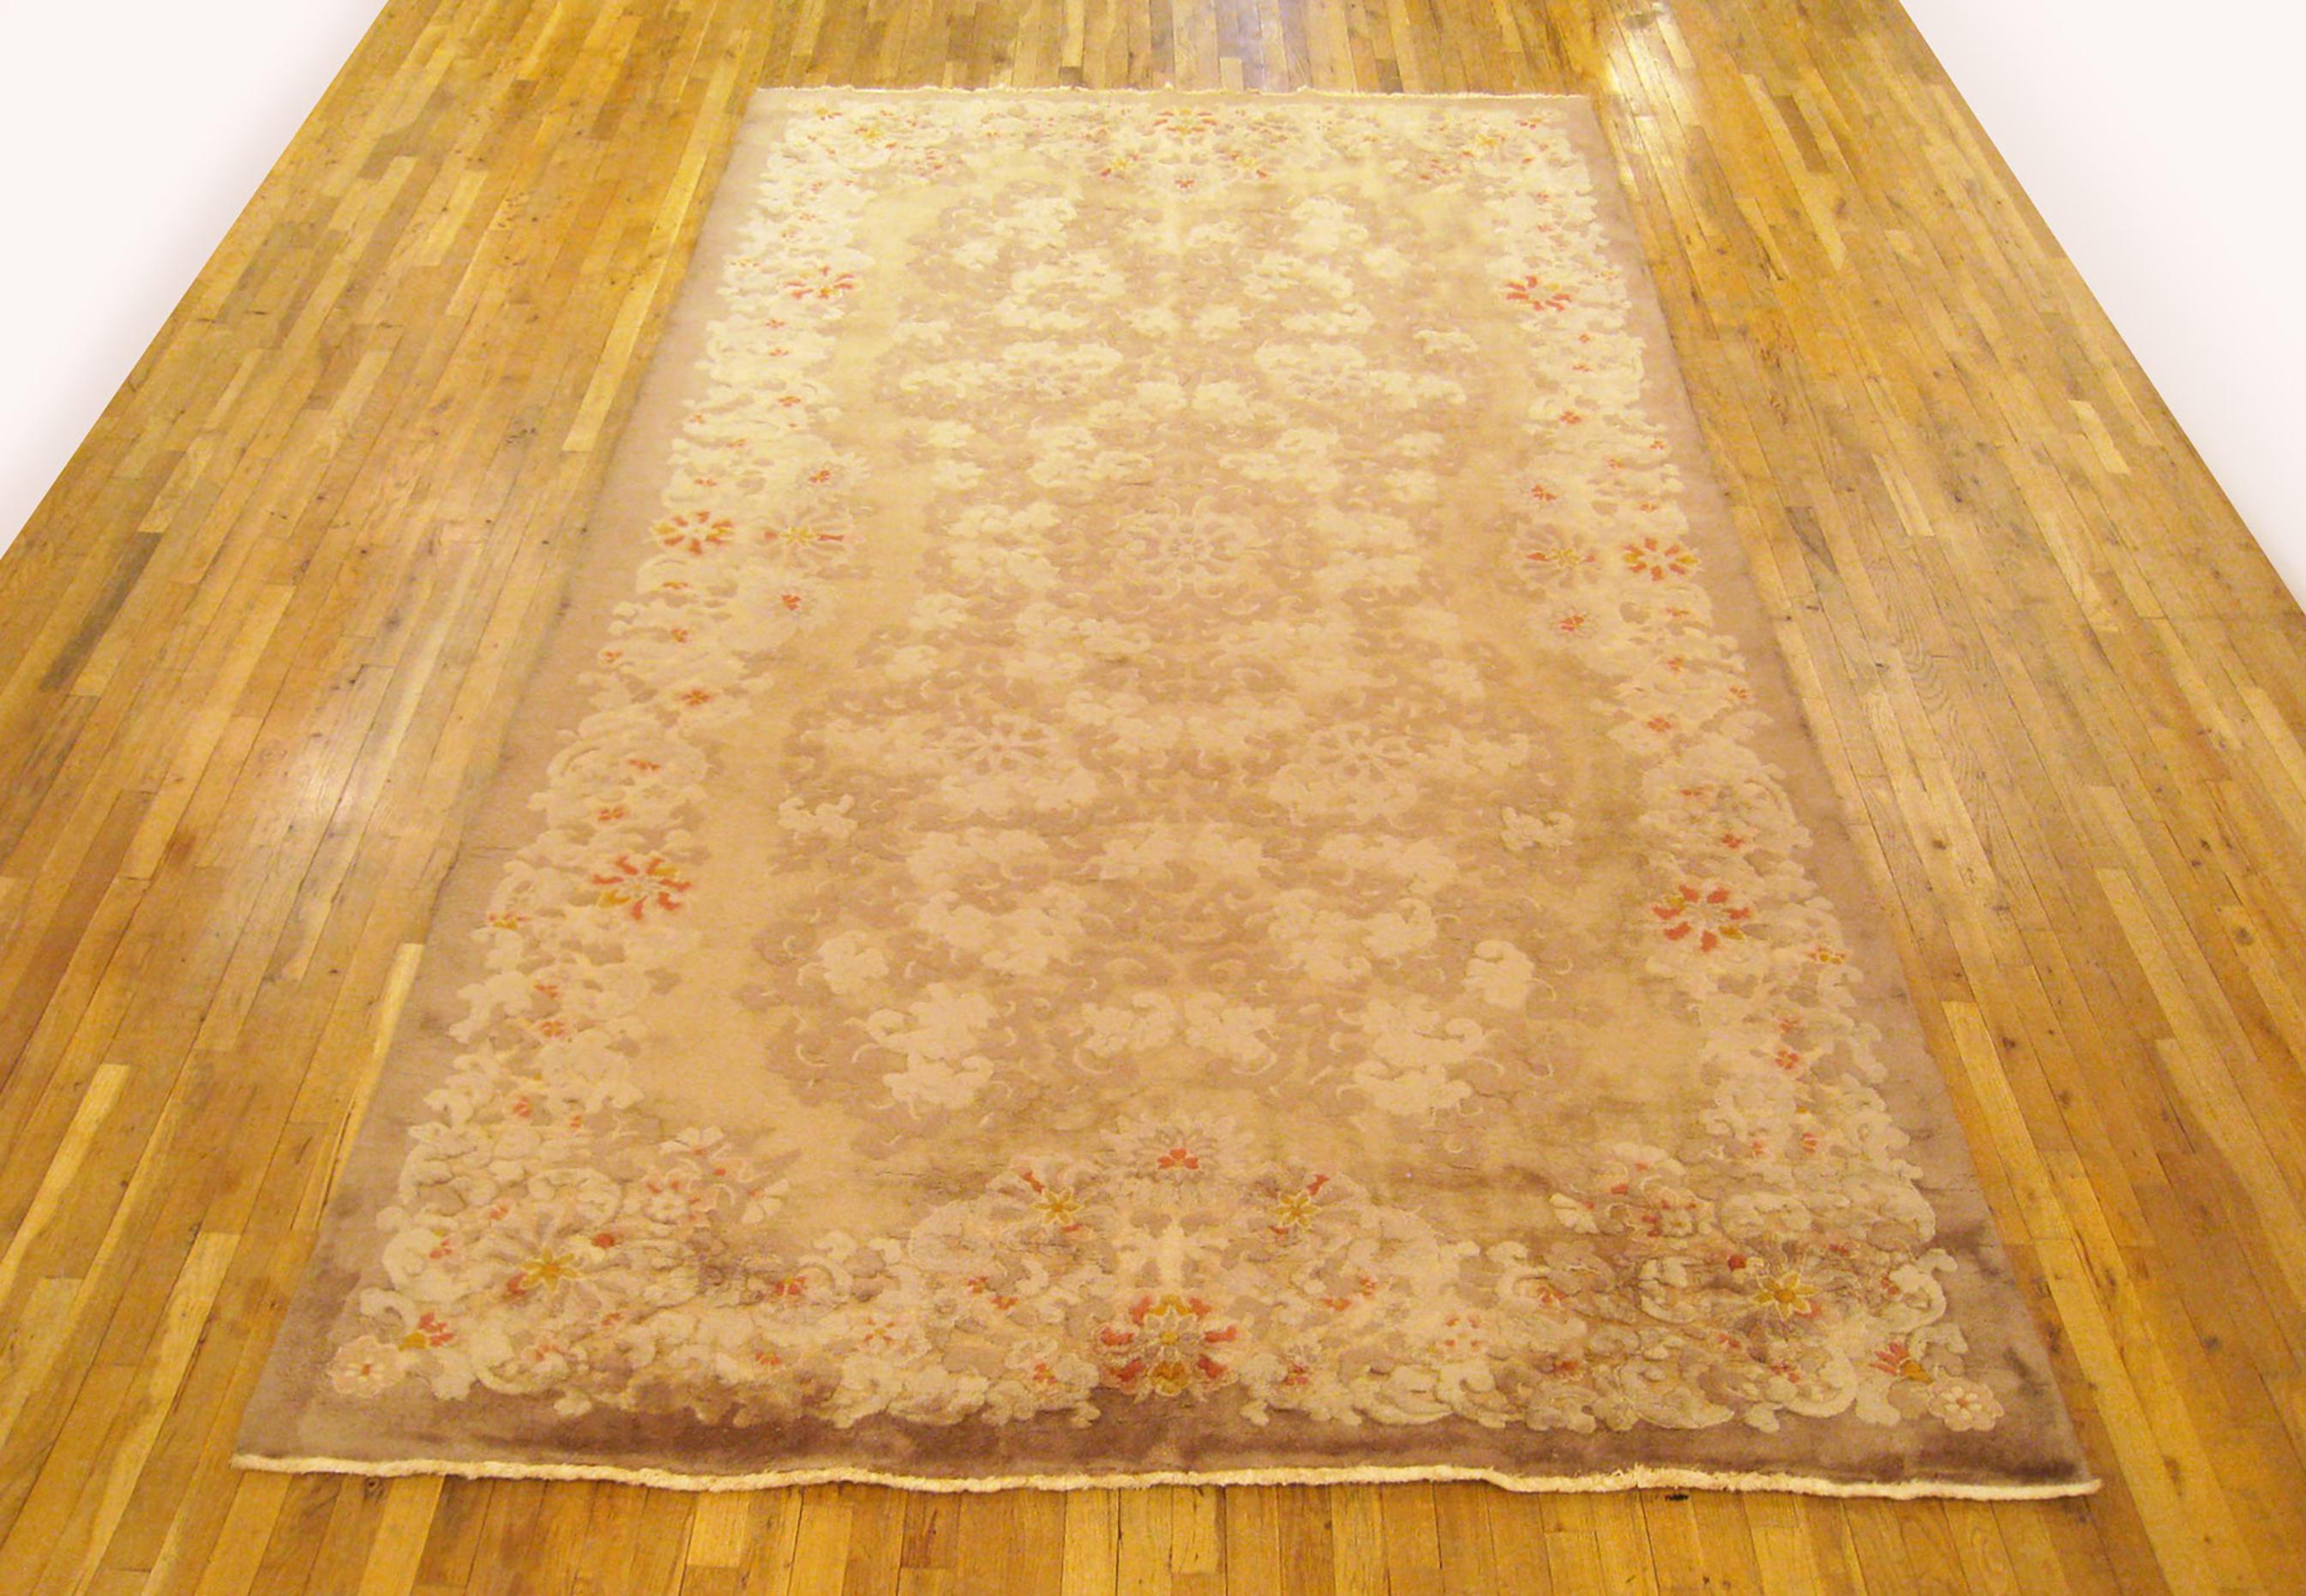 Vintage Chinese Rug, gallery size, circa 1940

A one-of-a-kind antique Chinese Mandarin oriental carpet, hand-knotted with medium thickness wool pile. This beautiful rug features a central medallion with floral elements in a  central brown open